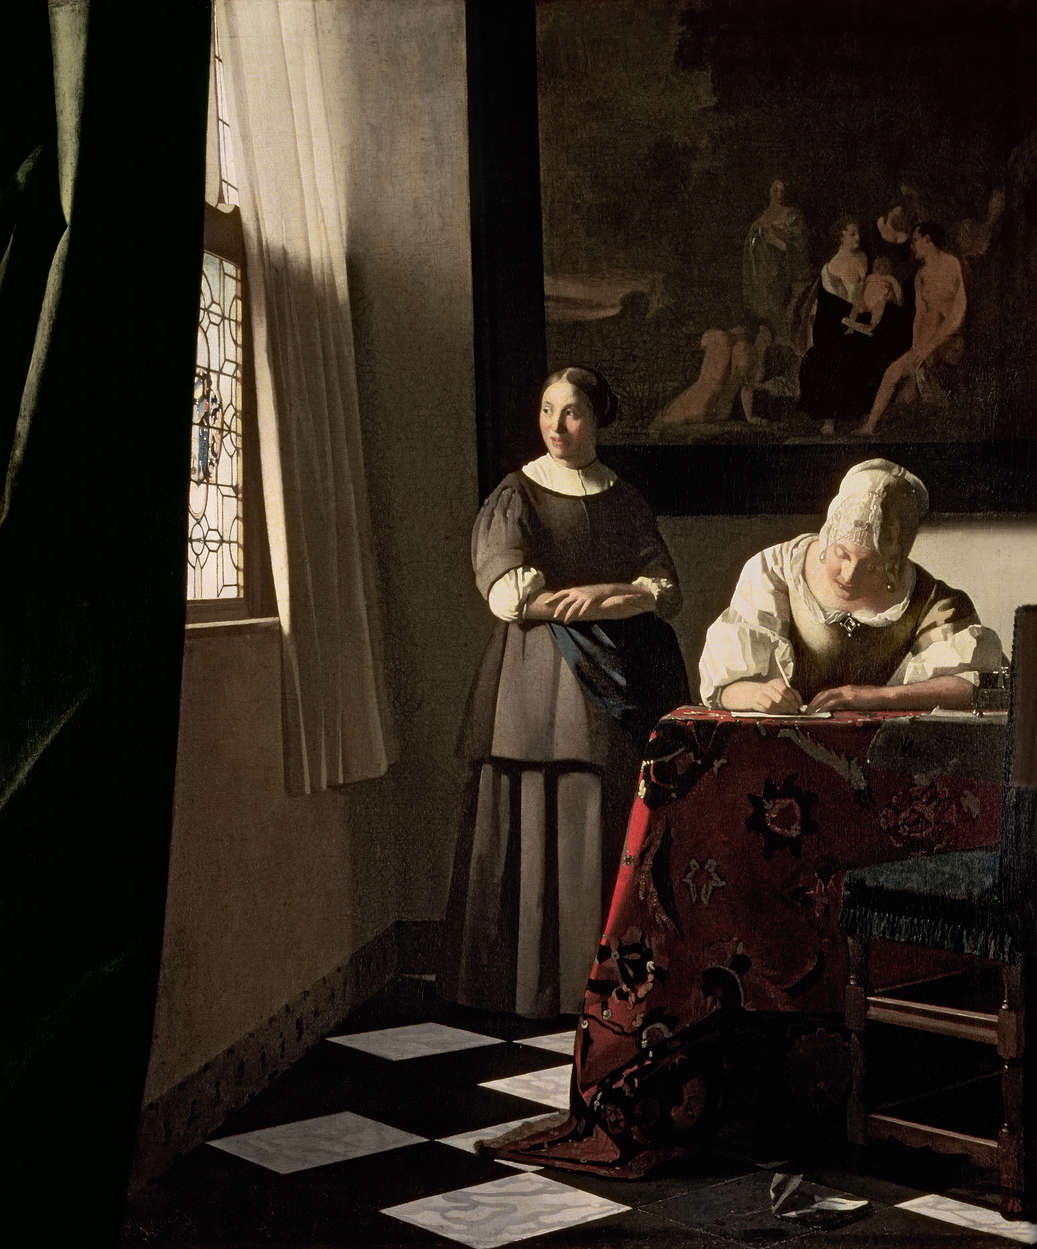             Photo wallpaper "Lady writing a letter with maid" by Jan Vermeer
        